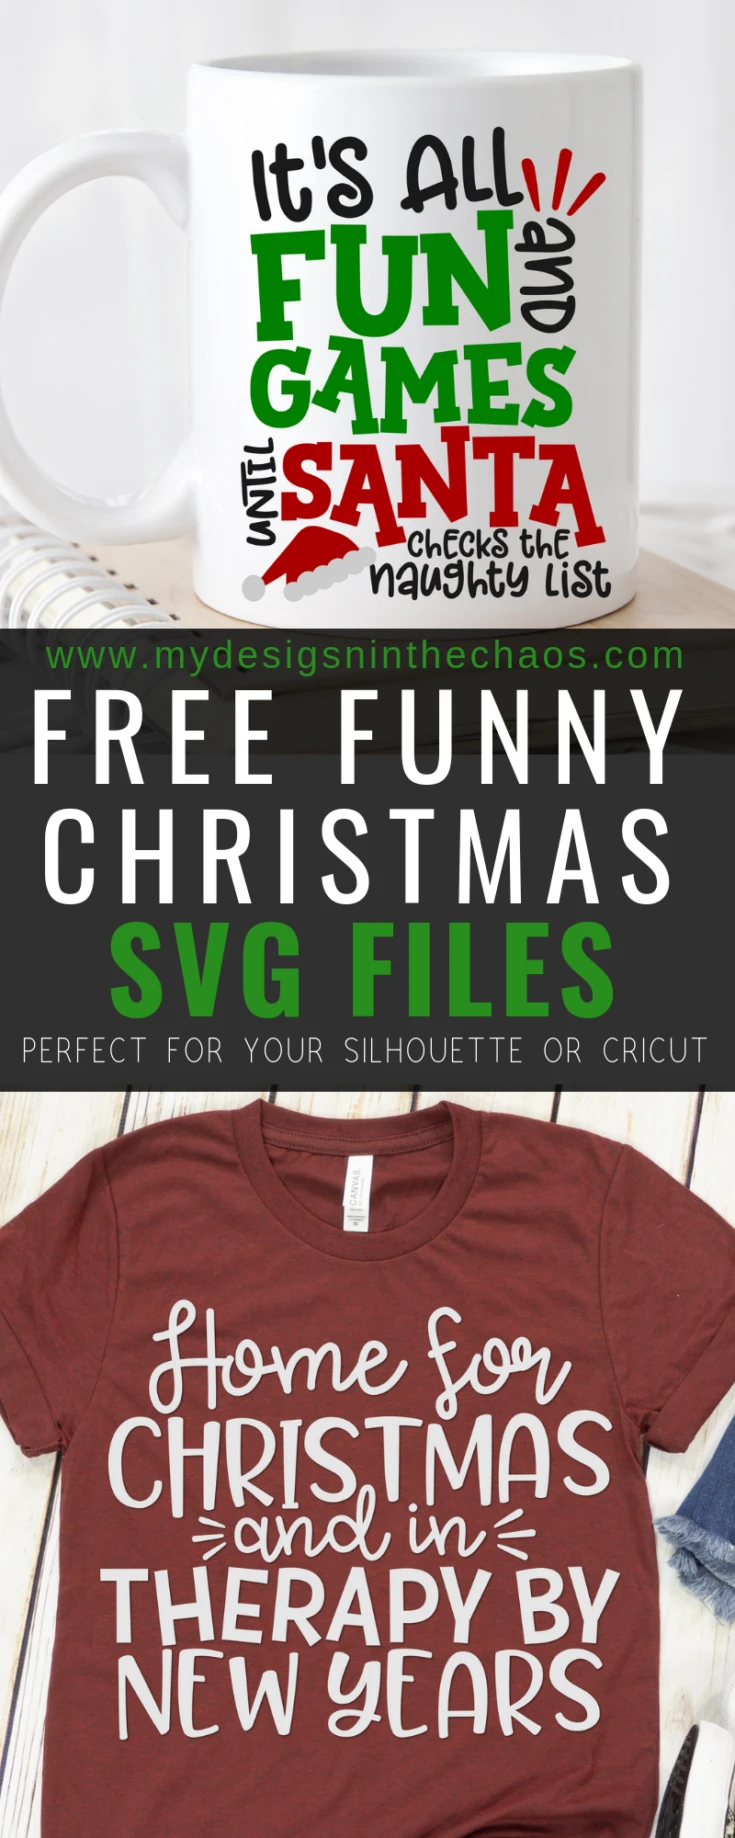 Download Christmas Svg Free Christmas Svg Files To Download